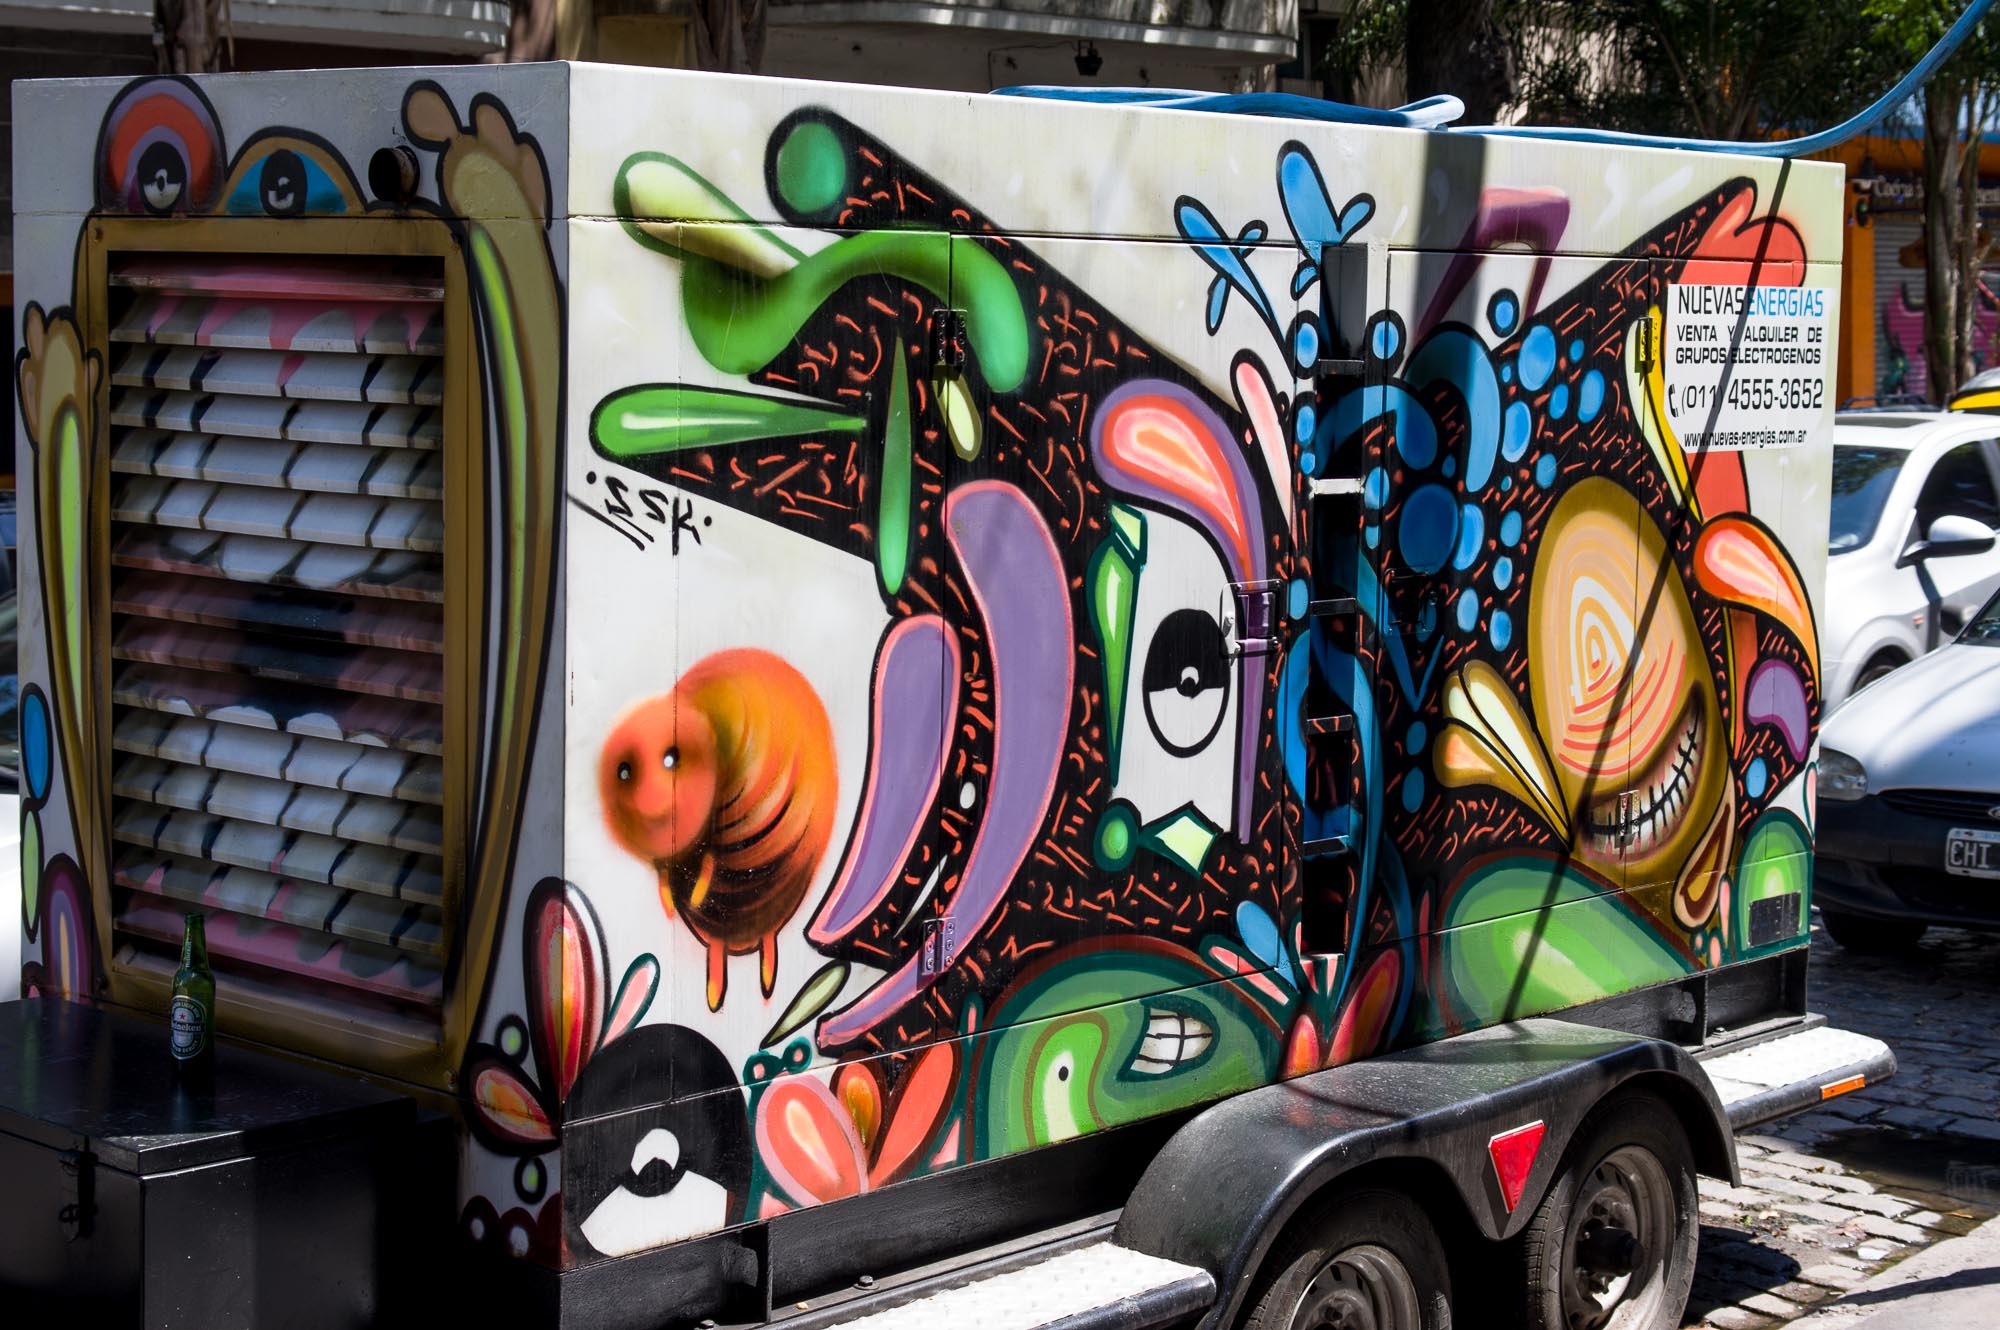 a large truck with colorful graffiti painted on the side